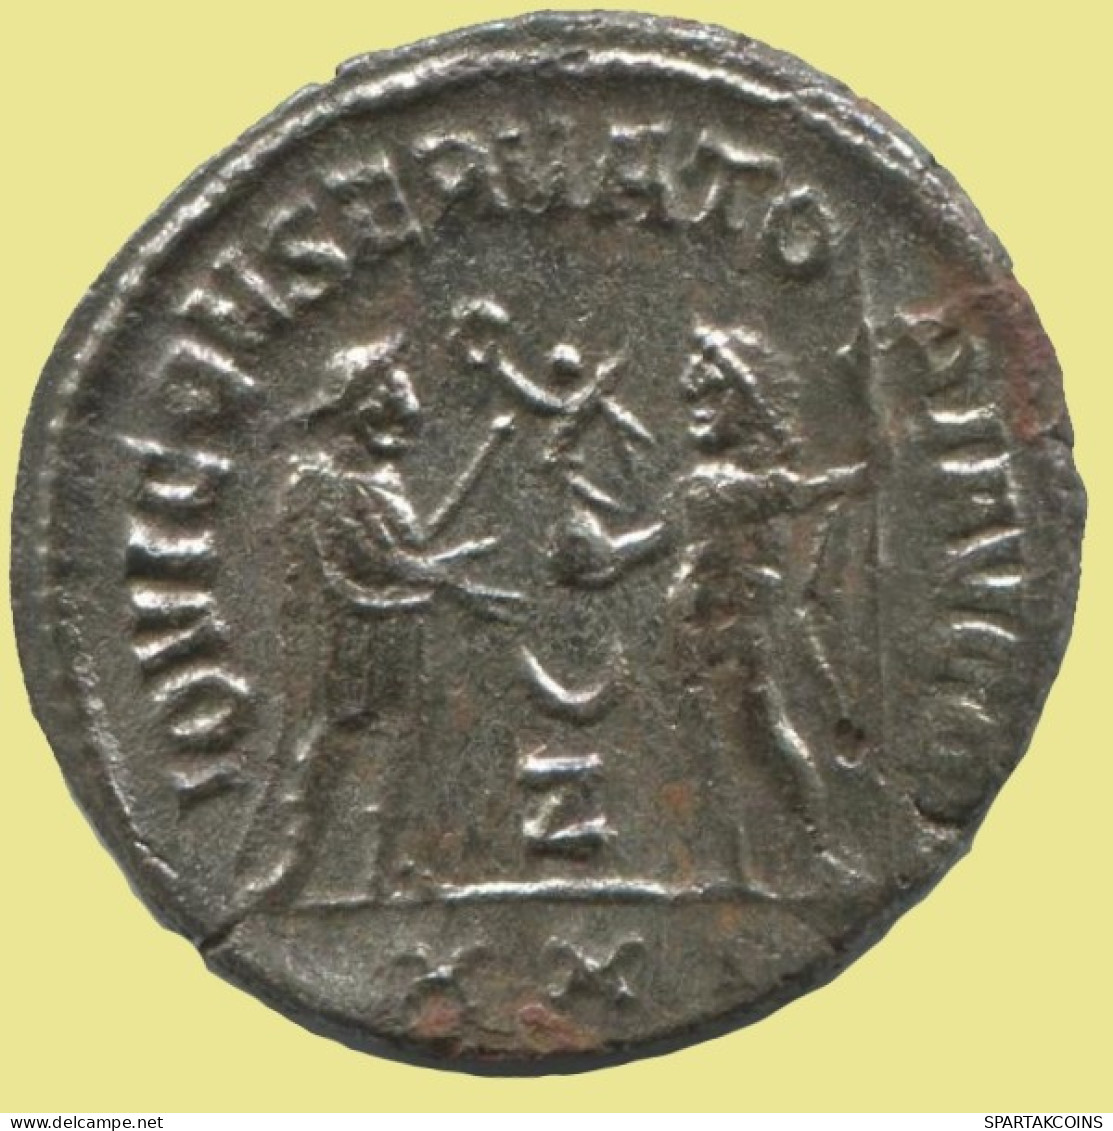 DIOCLETIAN ANTONINIANUS Antioch (? Z/XXI) AD293 IOVETHERCVCONSER. #ANT1871.48.E.A - The Tetrarchy (284 AD Tot 307 AD)